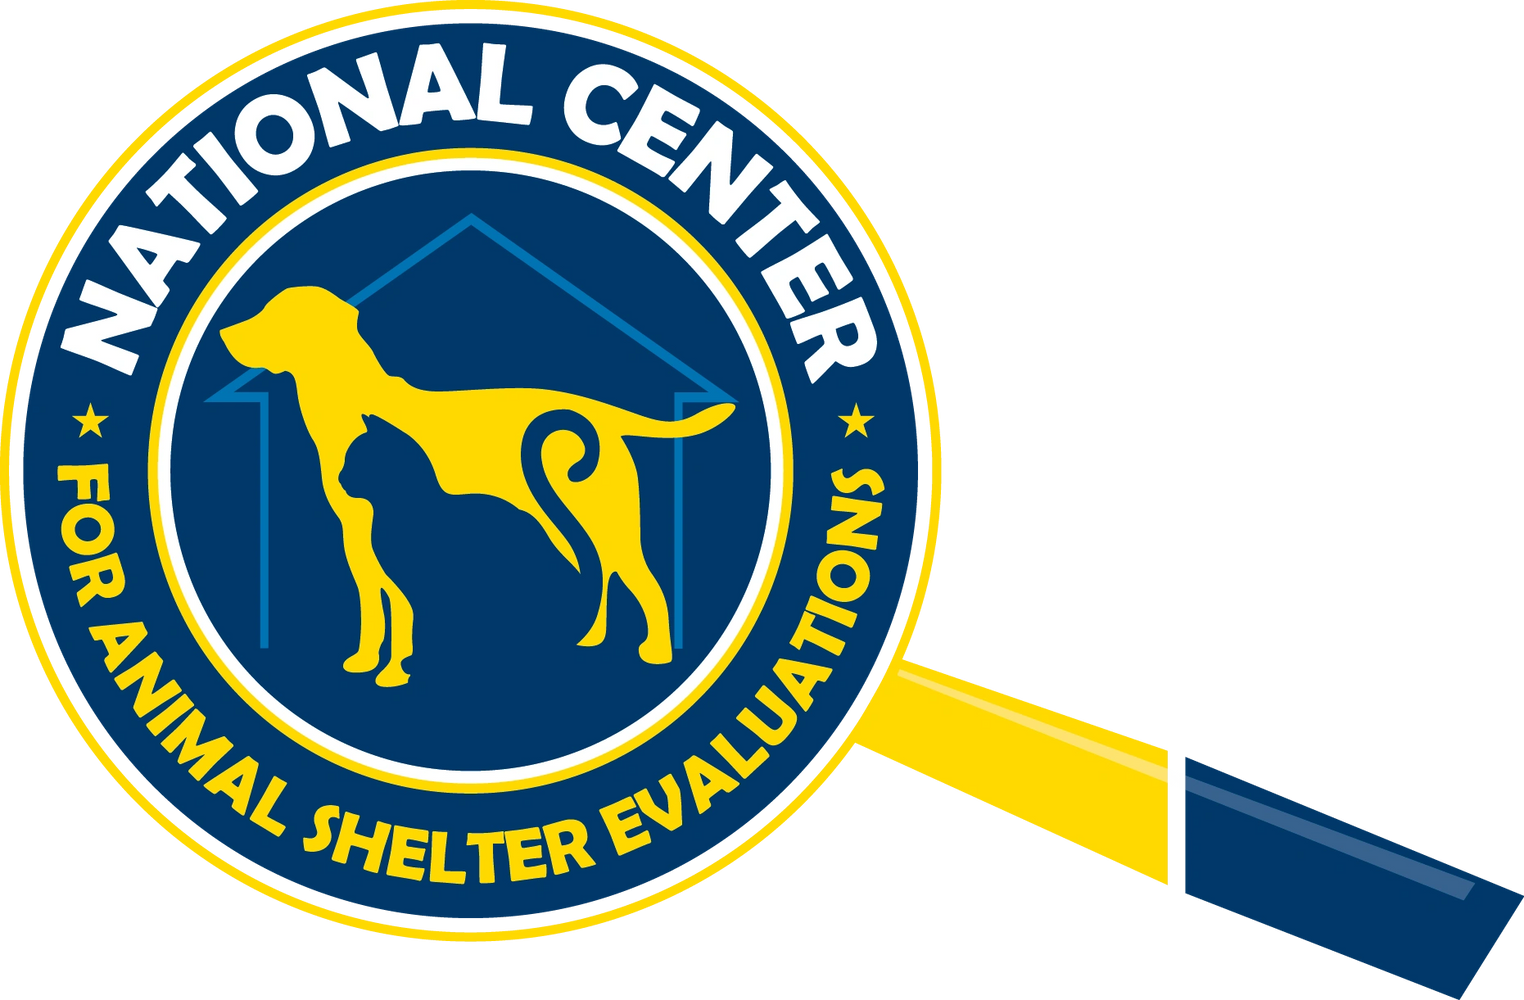 Logo for the National Center for Animal Shelter Evaluations